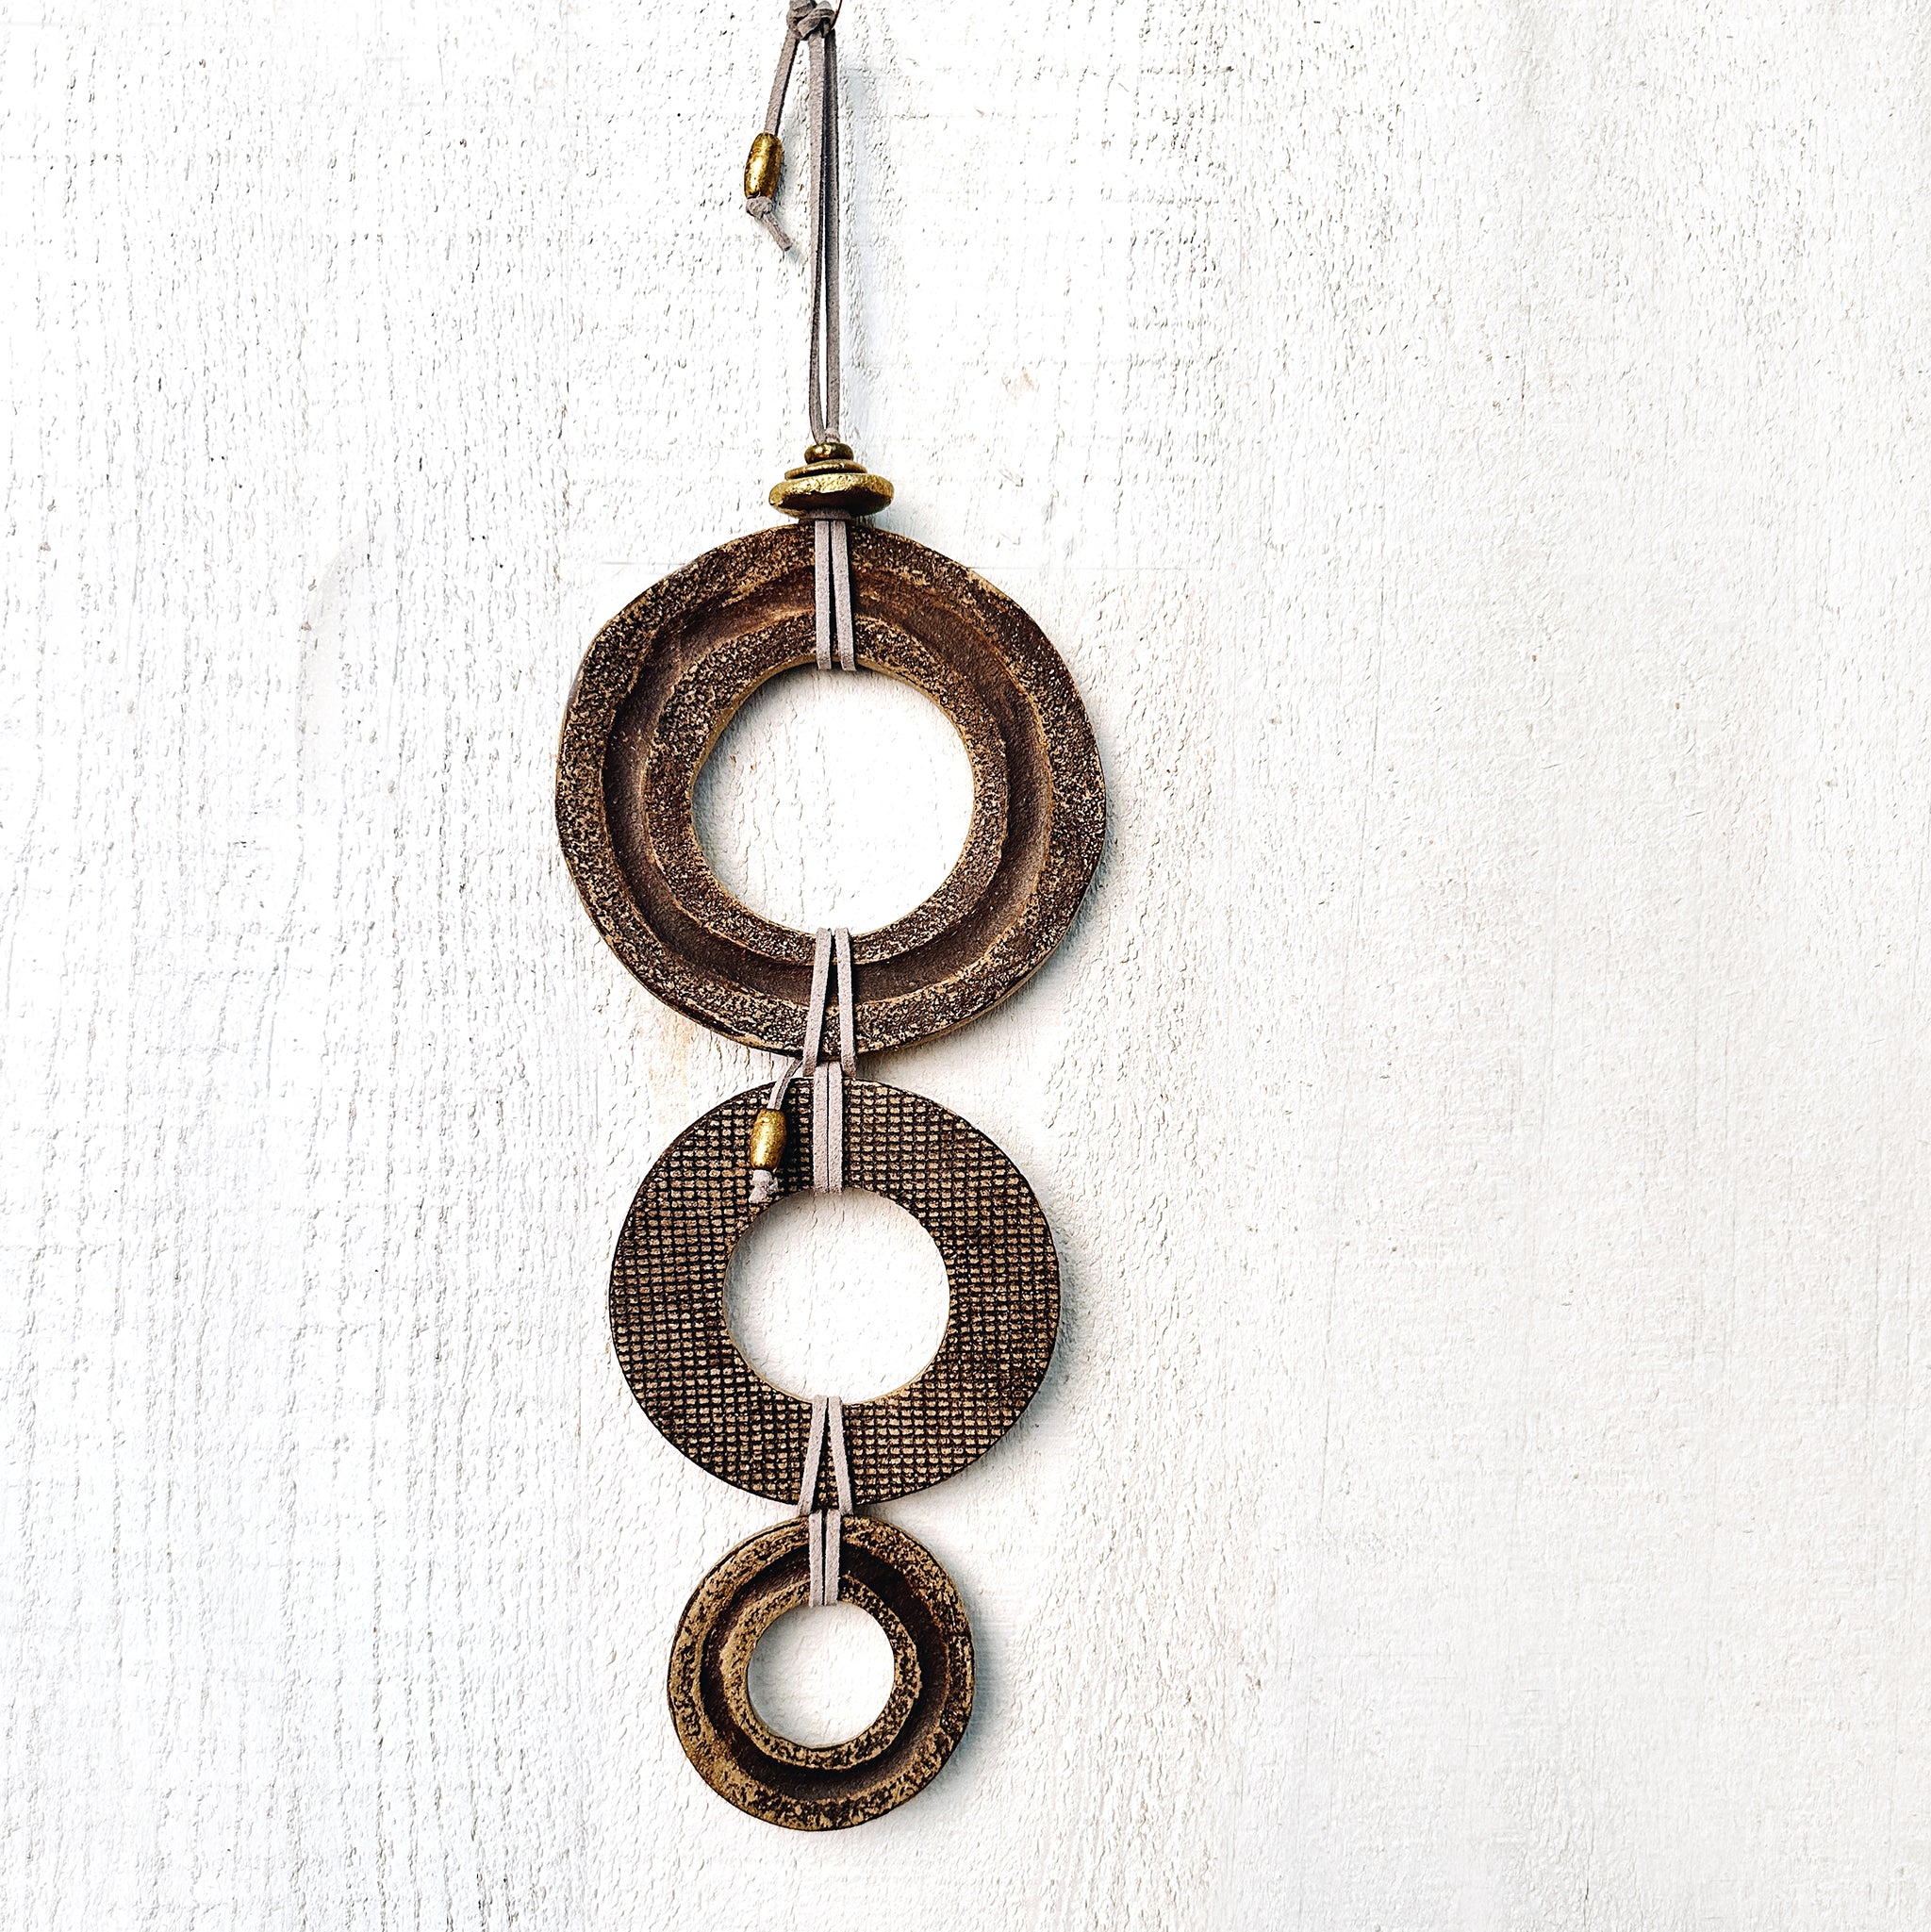 Whispering Circles Wall Hanging (Handcrafted, 12" L)